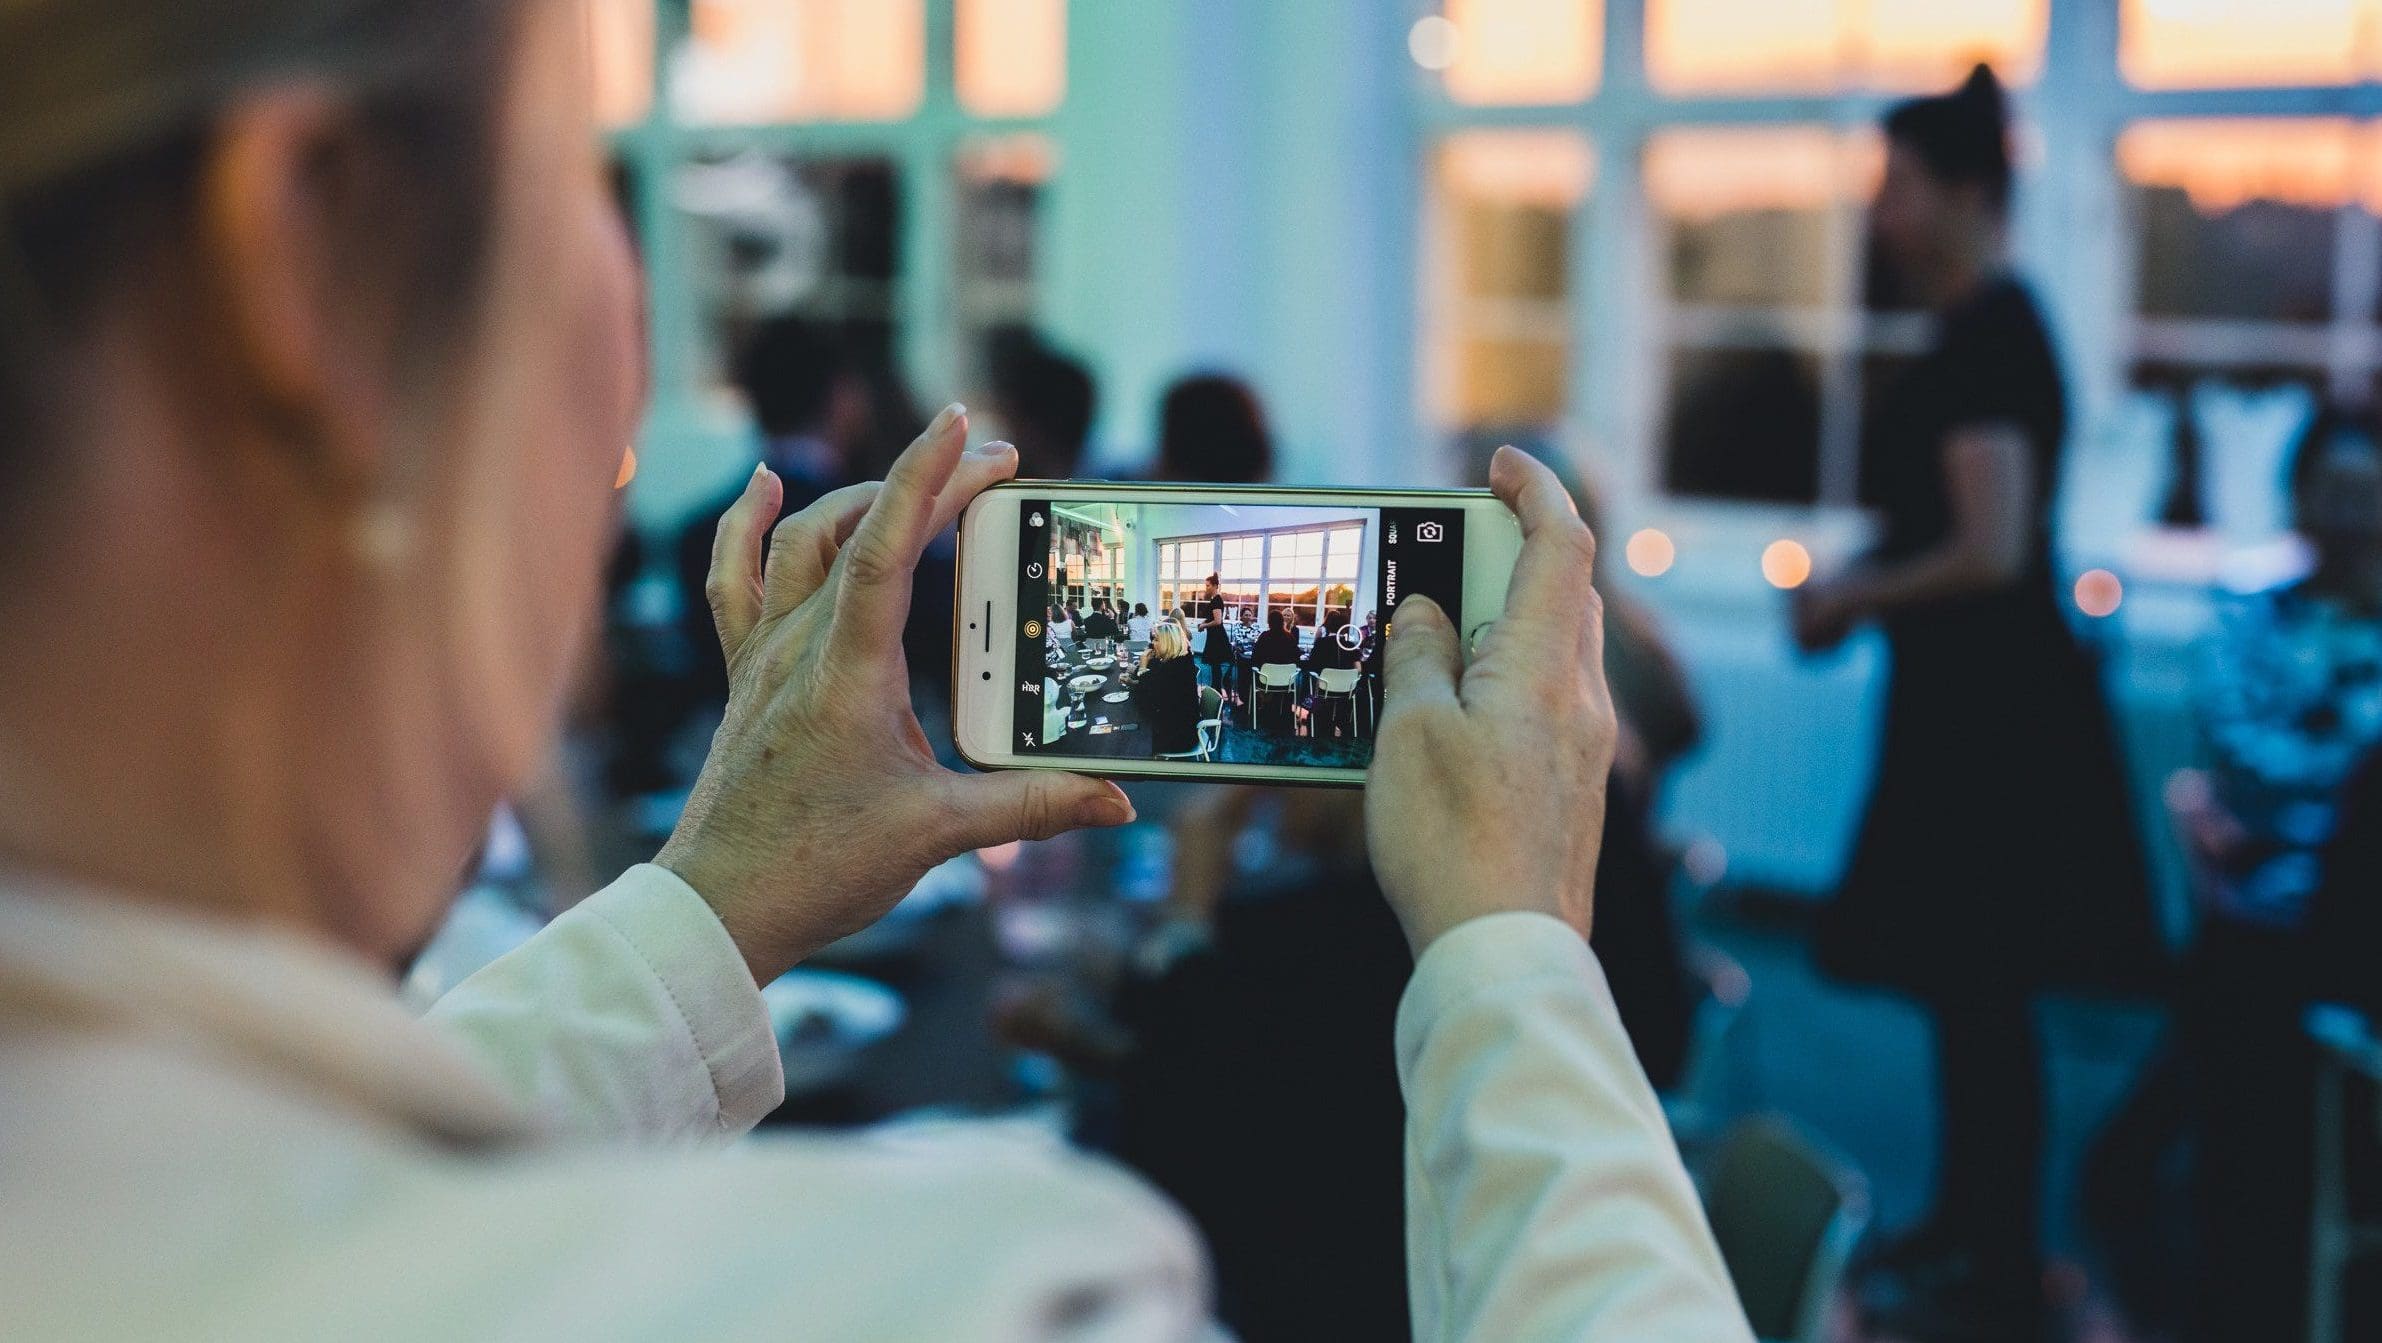 A ladi is taking a landscape picture of a group of people. The people in the pictures are dressed as in a formal business event, they either sit at the table or stand up and discuss among themselves. The lady who is taking the picture is photographed from her back. She seems to be dressed with a white shirt and have a lanyard around the neck.